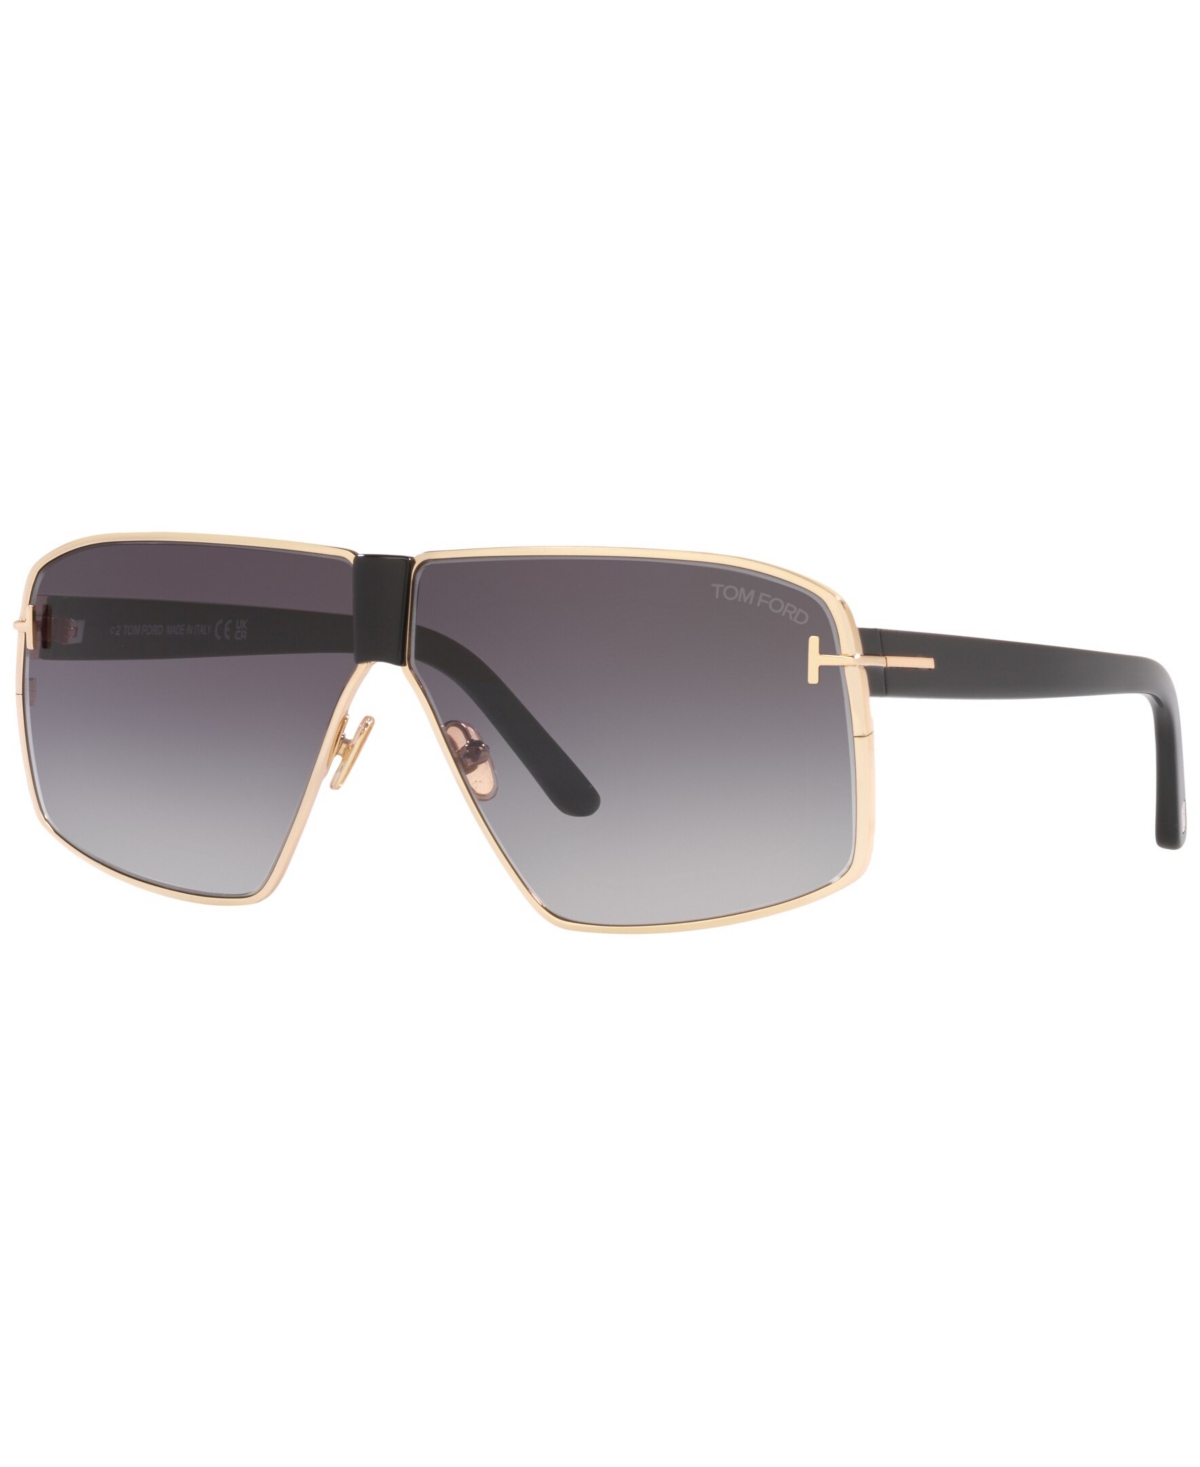 Tom Ford Men's Sunglasses, Tr001401 In Gold-tone Pink Shiny